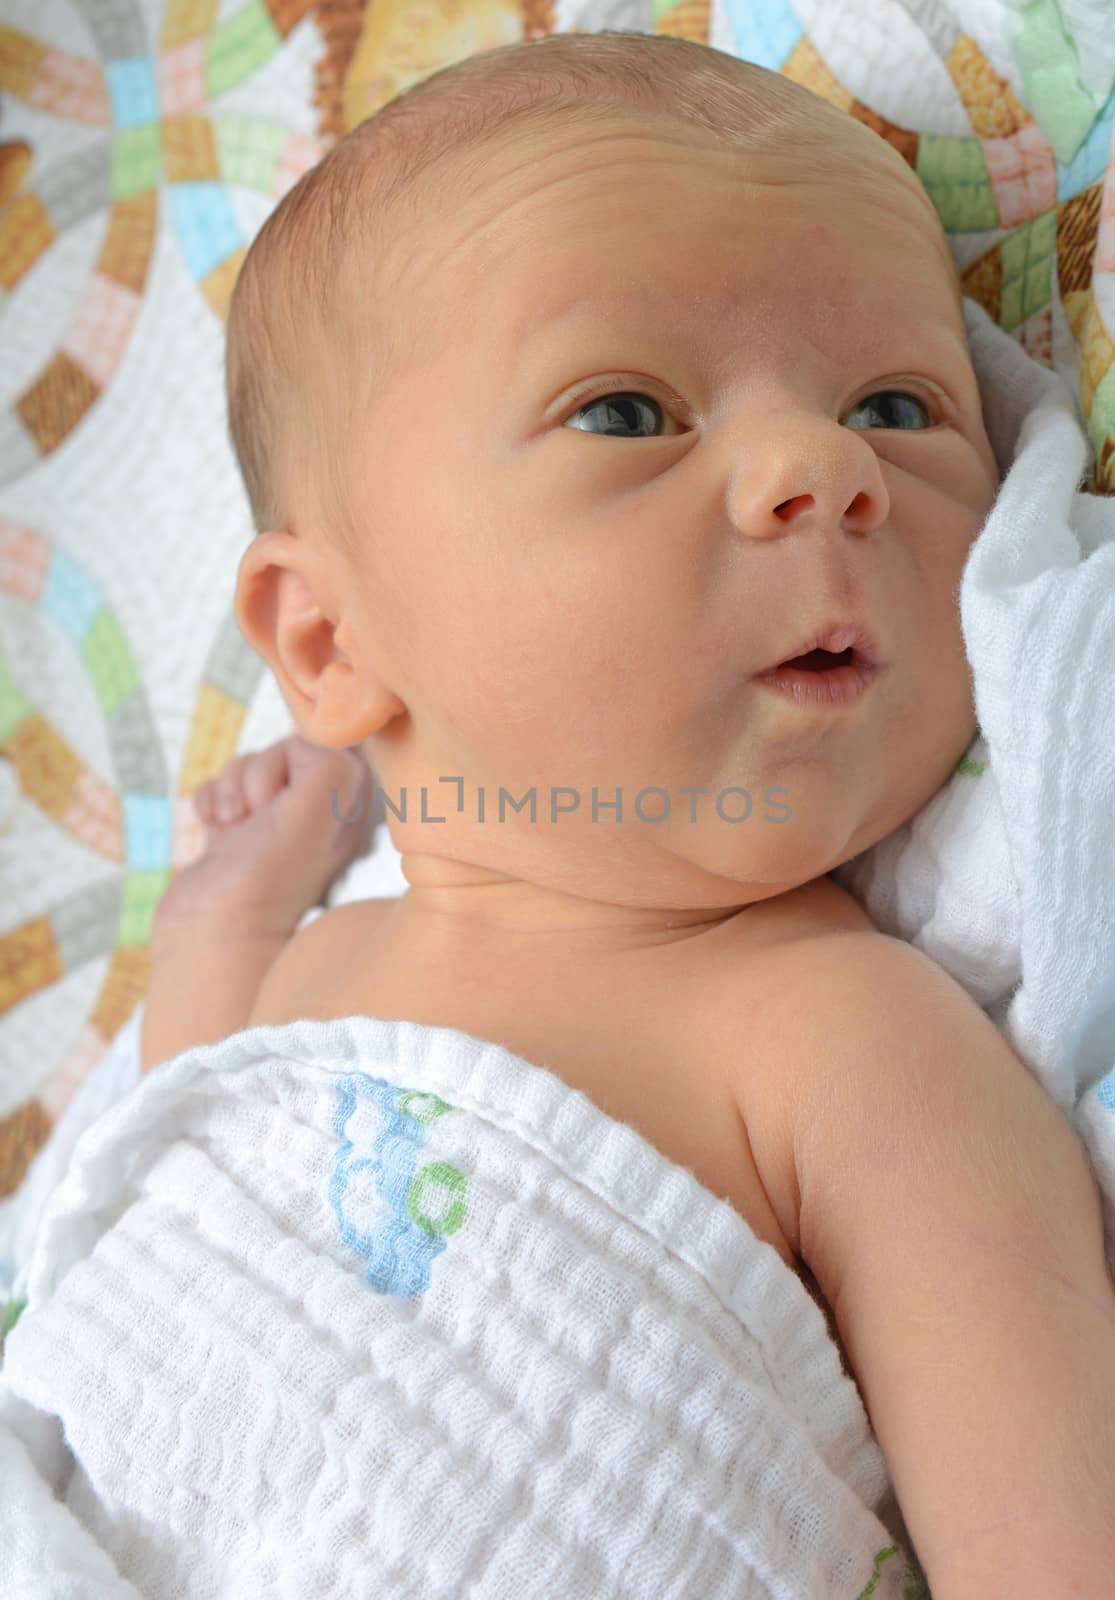 newborn with an expression of wonder by ftlaudgirl